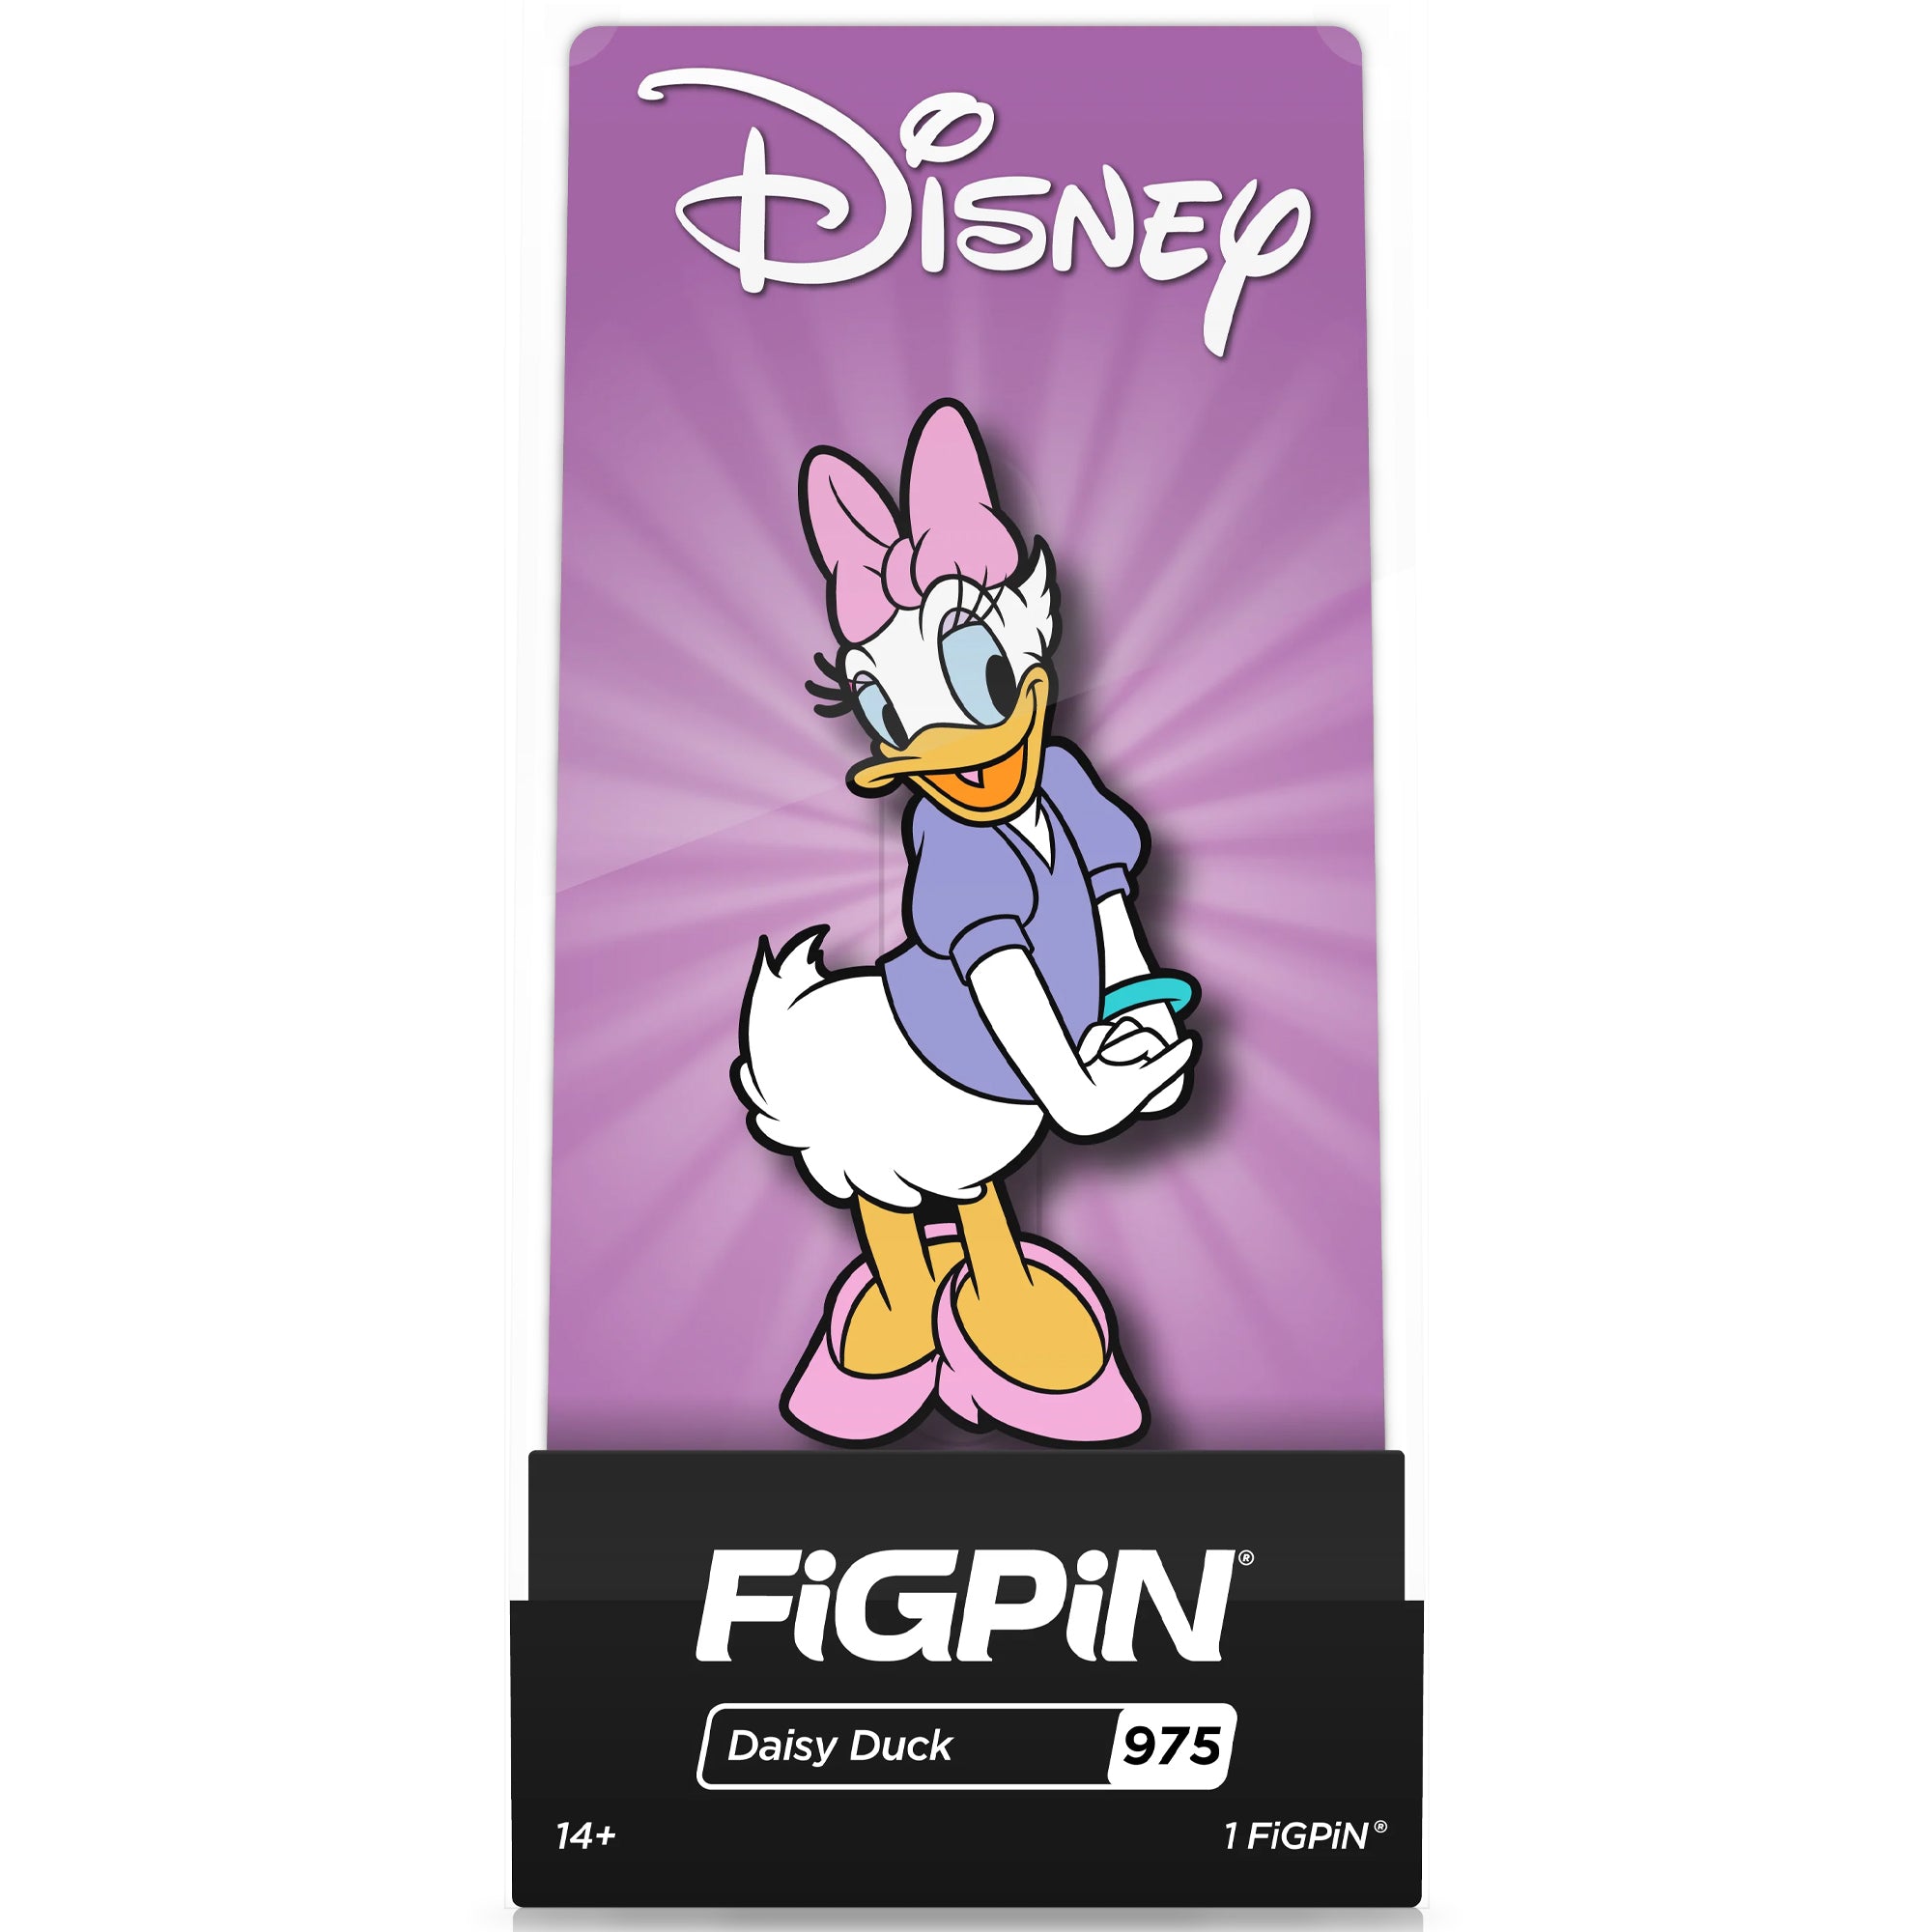 Disney Daisy Duck Limited Edition 3" Collectible Pin #975